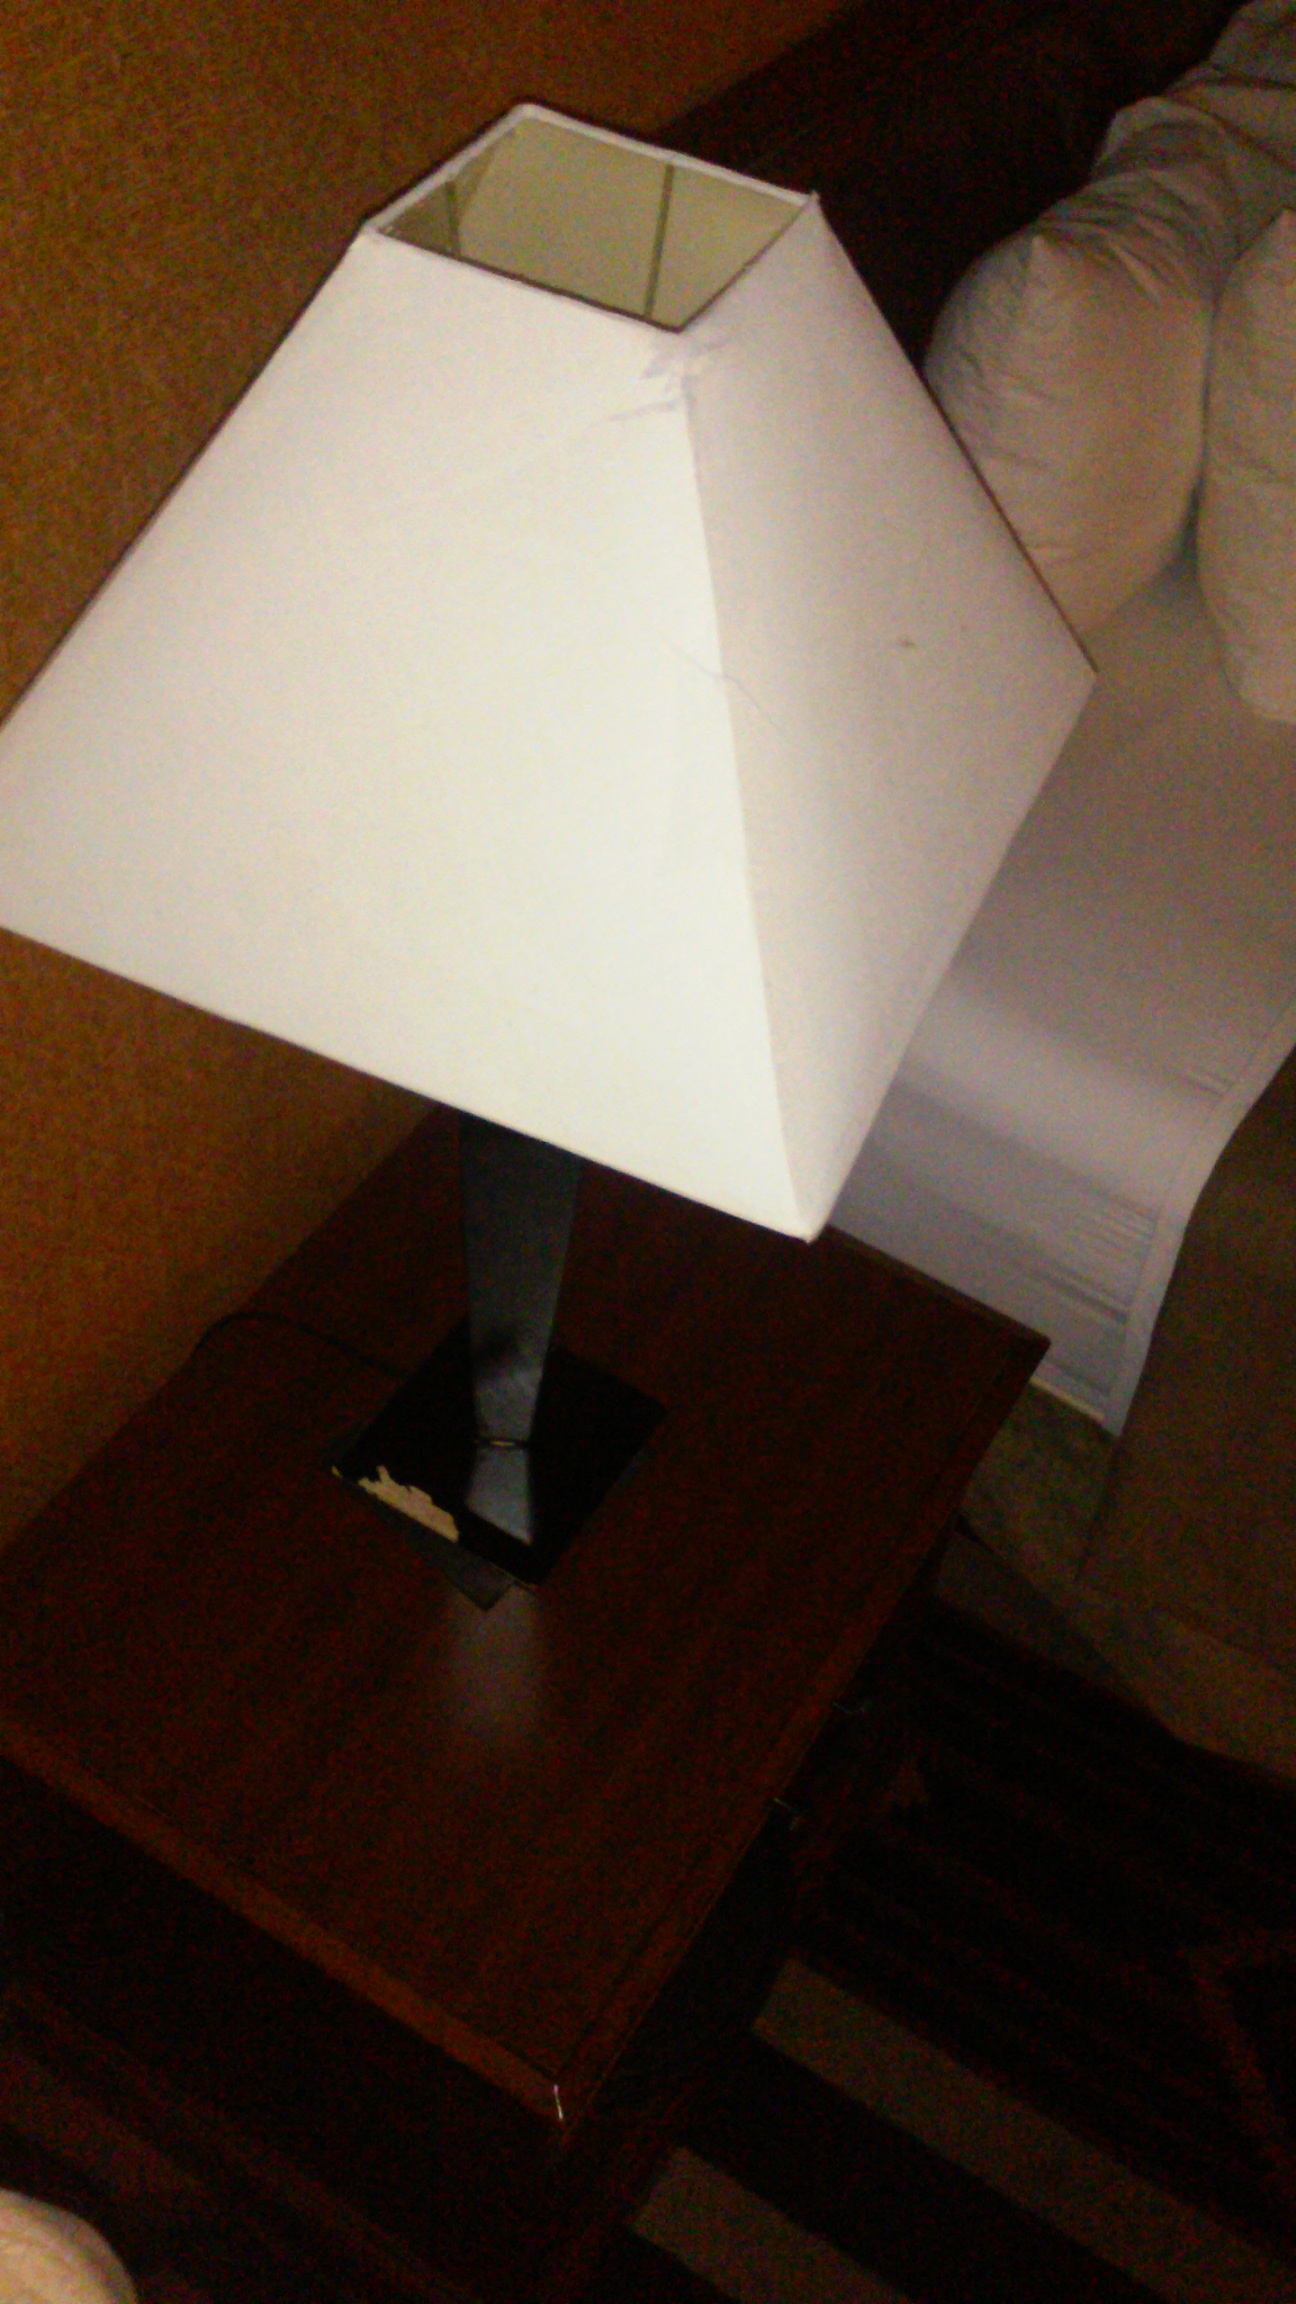 That Is One Jacked Up Lamp